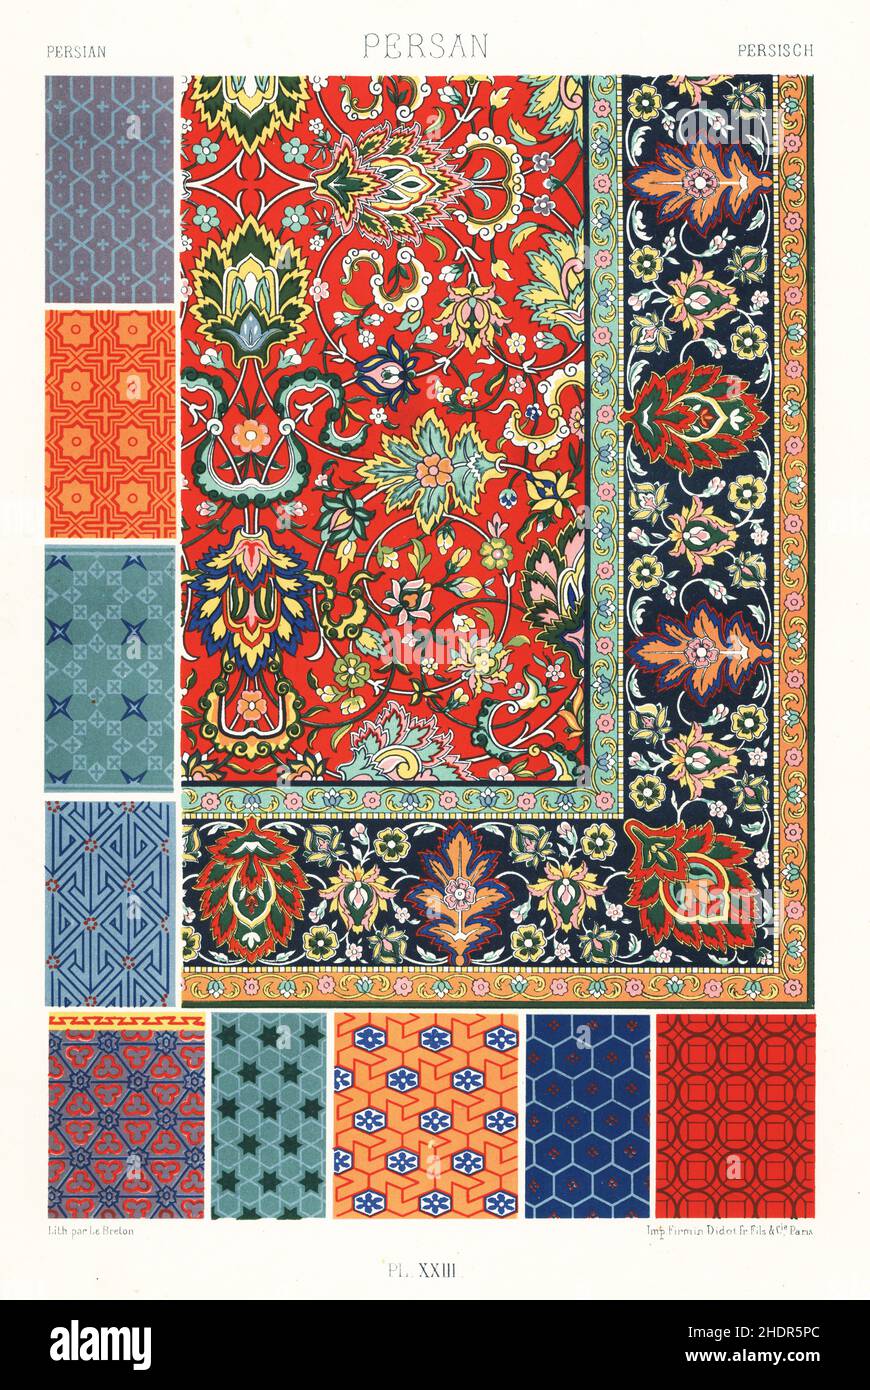 Persian art: tapestry and flowing ornaments. Oriental palms and floral design from an emboidered carpet, and nine examples of running patterns from manuscripts of the Shahnameh in the Bibliotheque Nationale, Paris. Persan. Hand-finished chromolithograph by Le Breton from Albert-Charles-Auguste Racinet’s L’Ornement Polychrome, (Polychromatic Ornament), Firmin-Didot, Paris, 1869-73. Stock Photo